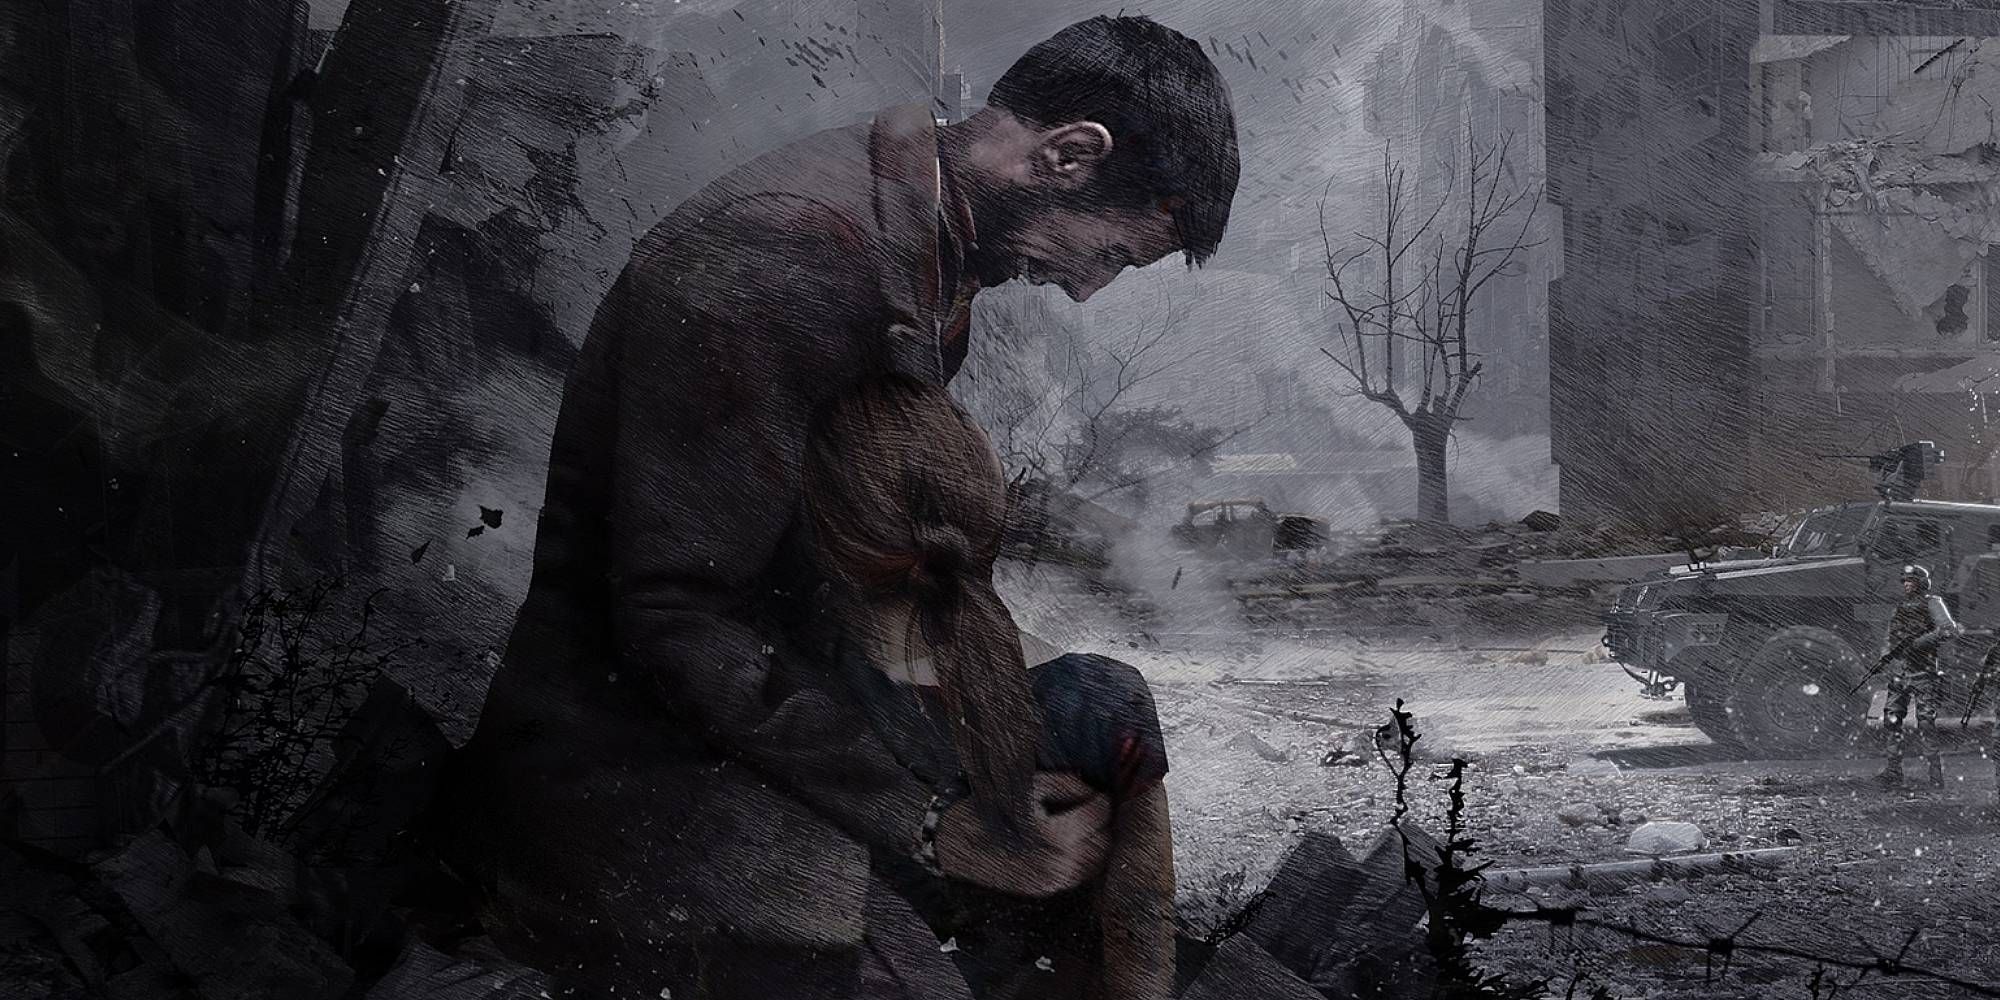 Bleak art of a man crying as he clutches a woman in a bombed city in This War Of Mine.